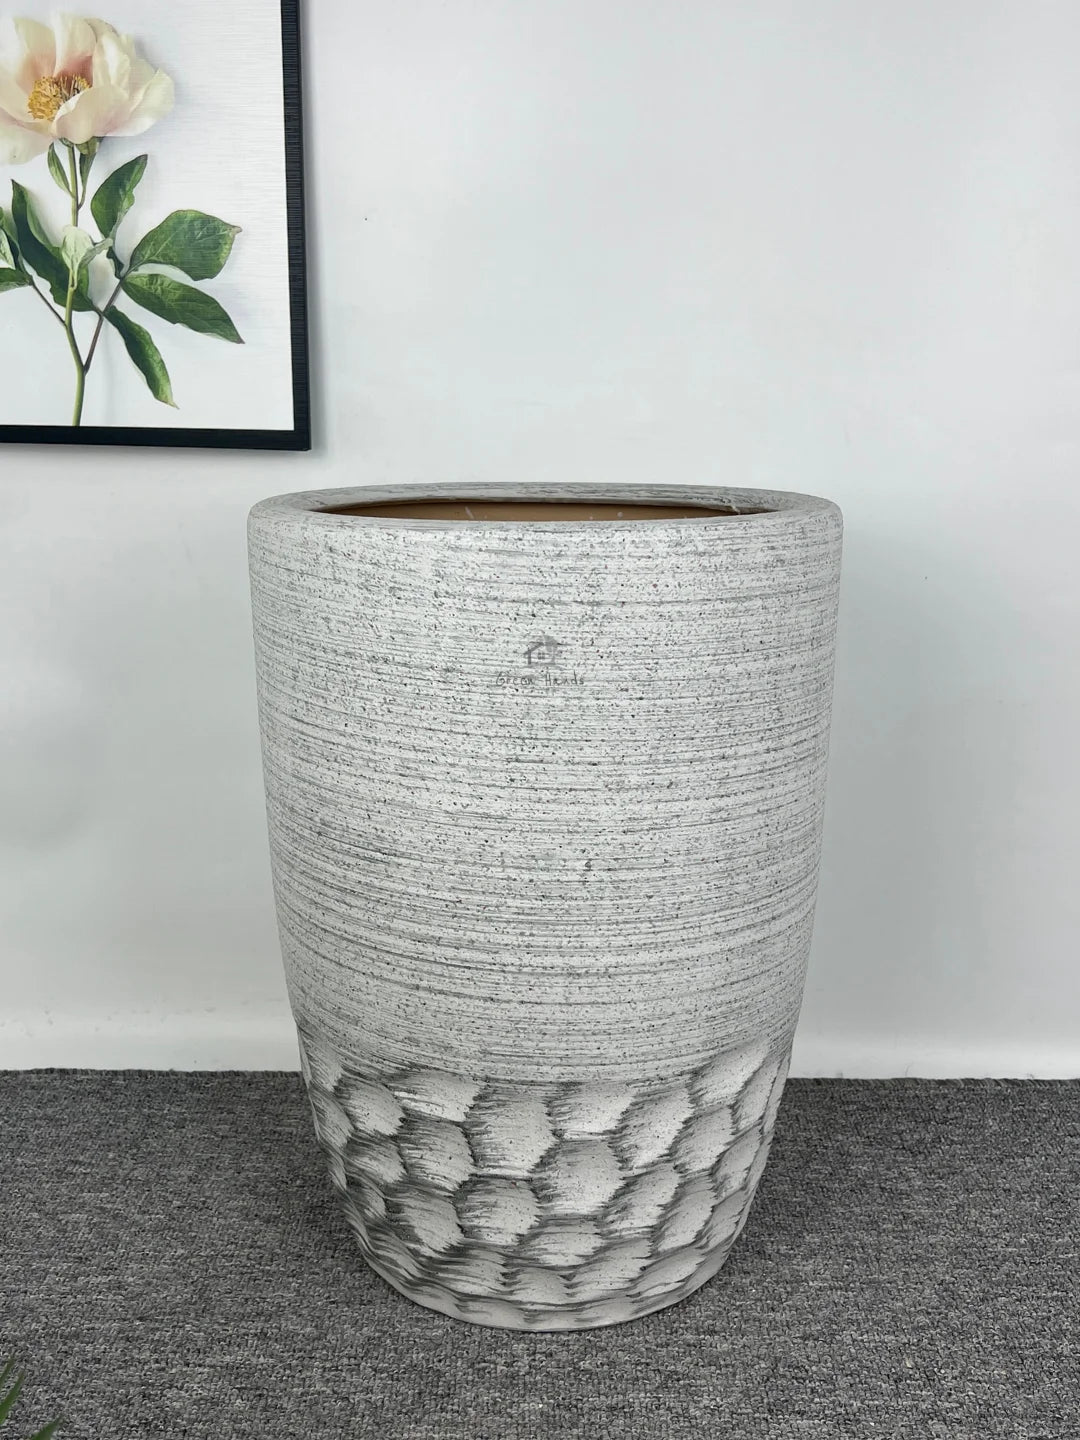 Modern Tall Ceramic Grey Honey Comb Pots: Elegance and Functionality Combined